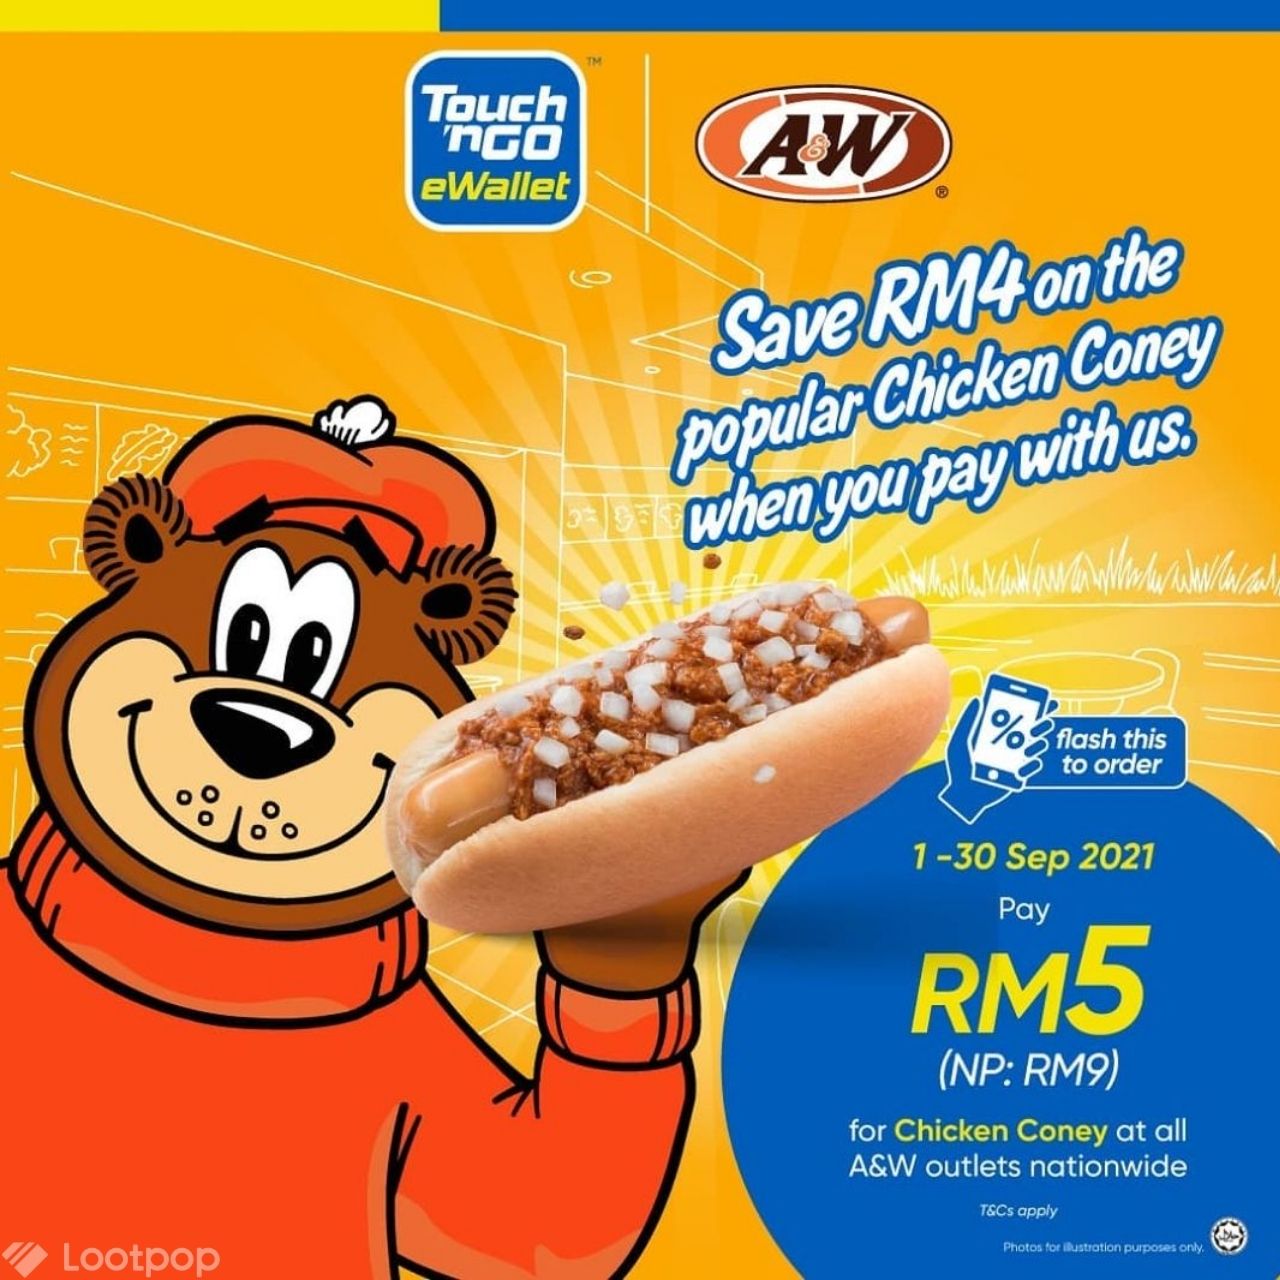 A&W RM5 Chicken Coney Promotion with Touch 'n Go eWallet